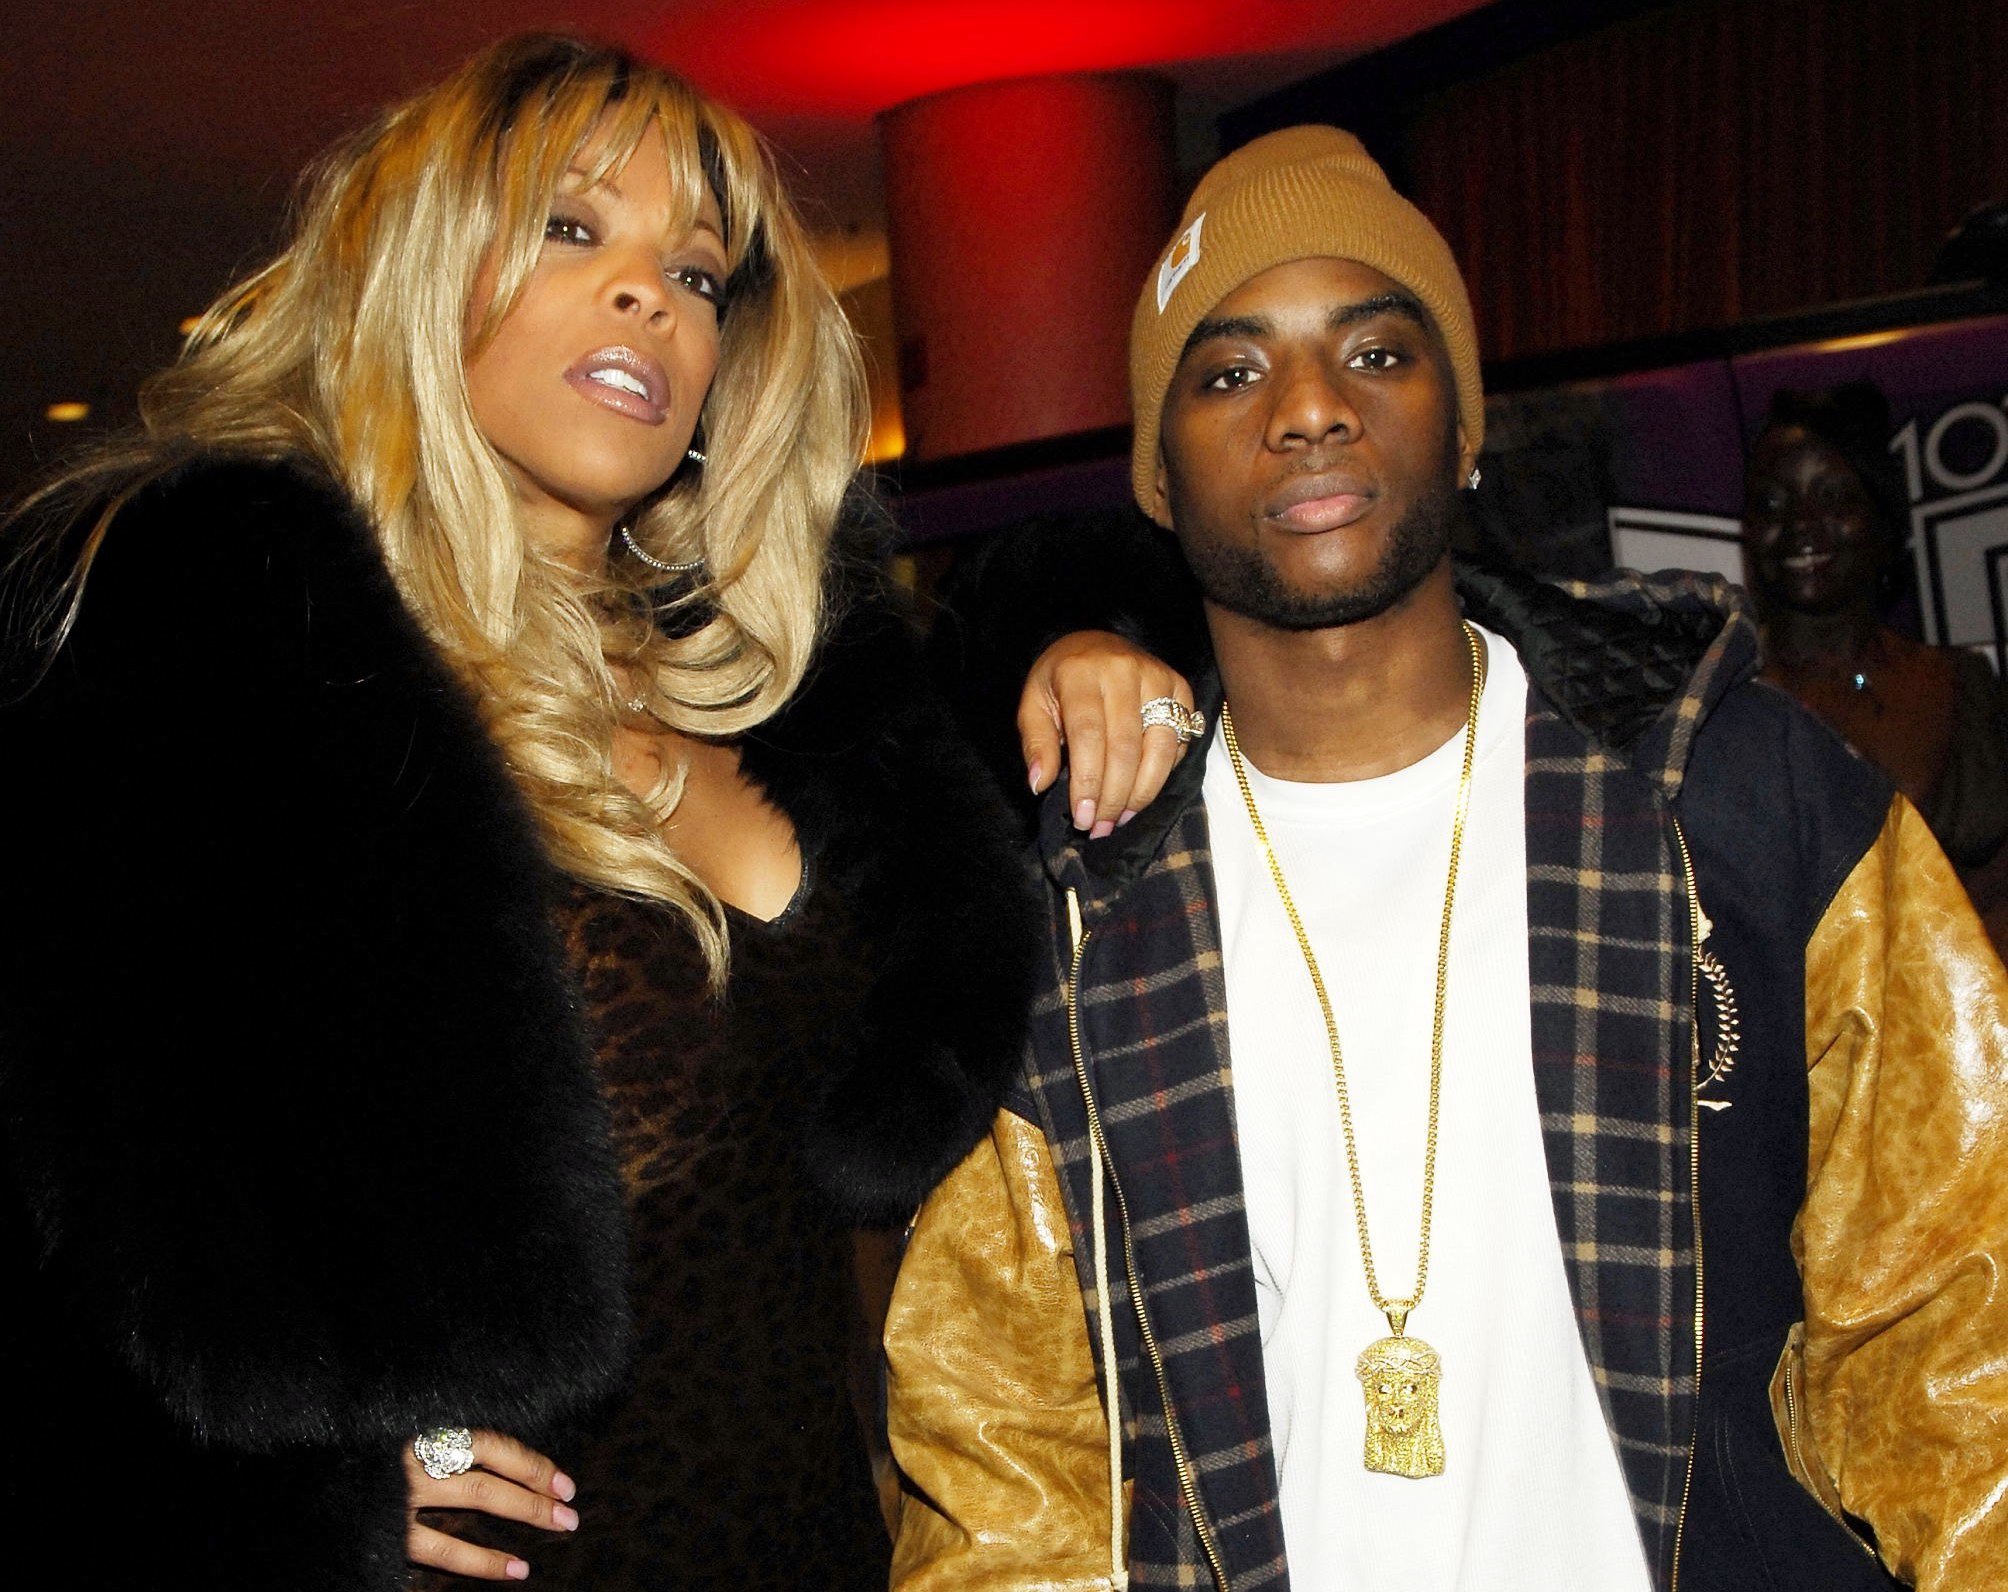 Wendy Williams wearing a black coat posing with her arm on Charlamagne tha God’s shoulder.
